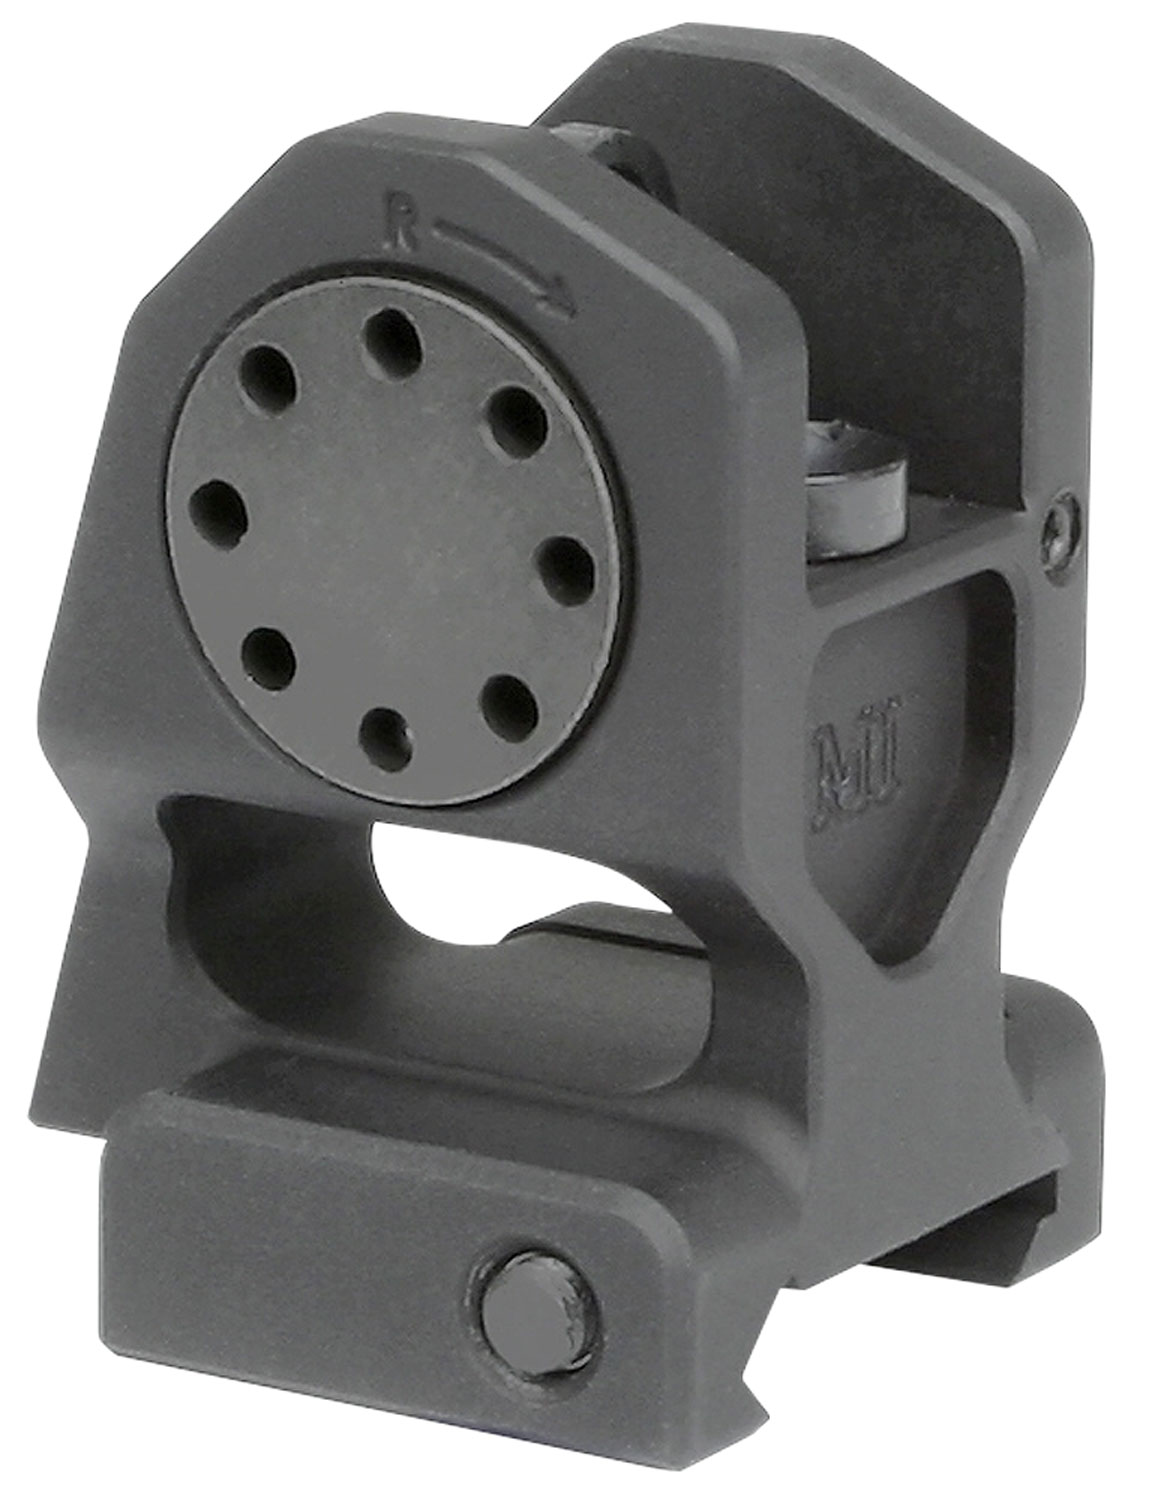 Midwest Industries MICBUIS Combat Rifle Fixed Sight Rear Black for AR-15, M16, M4